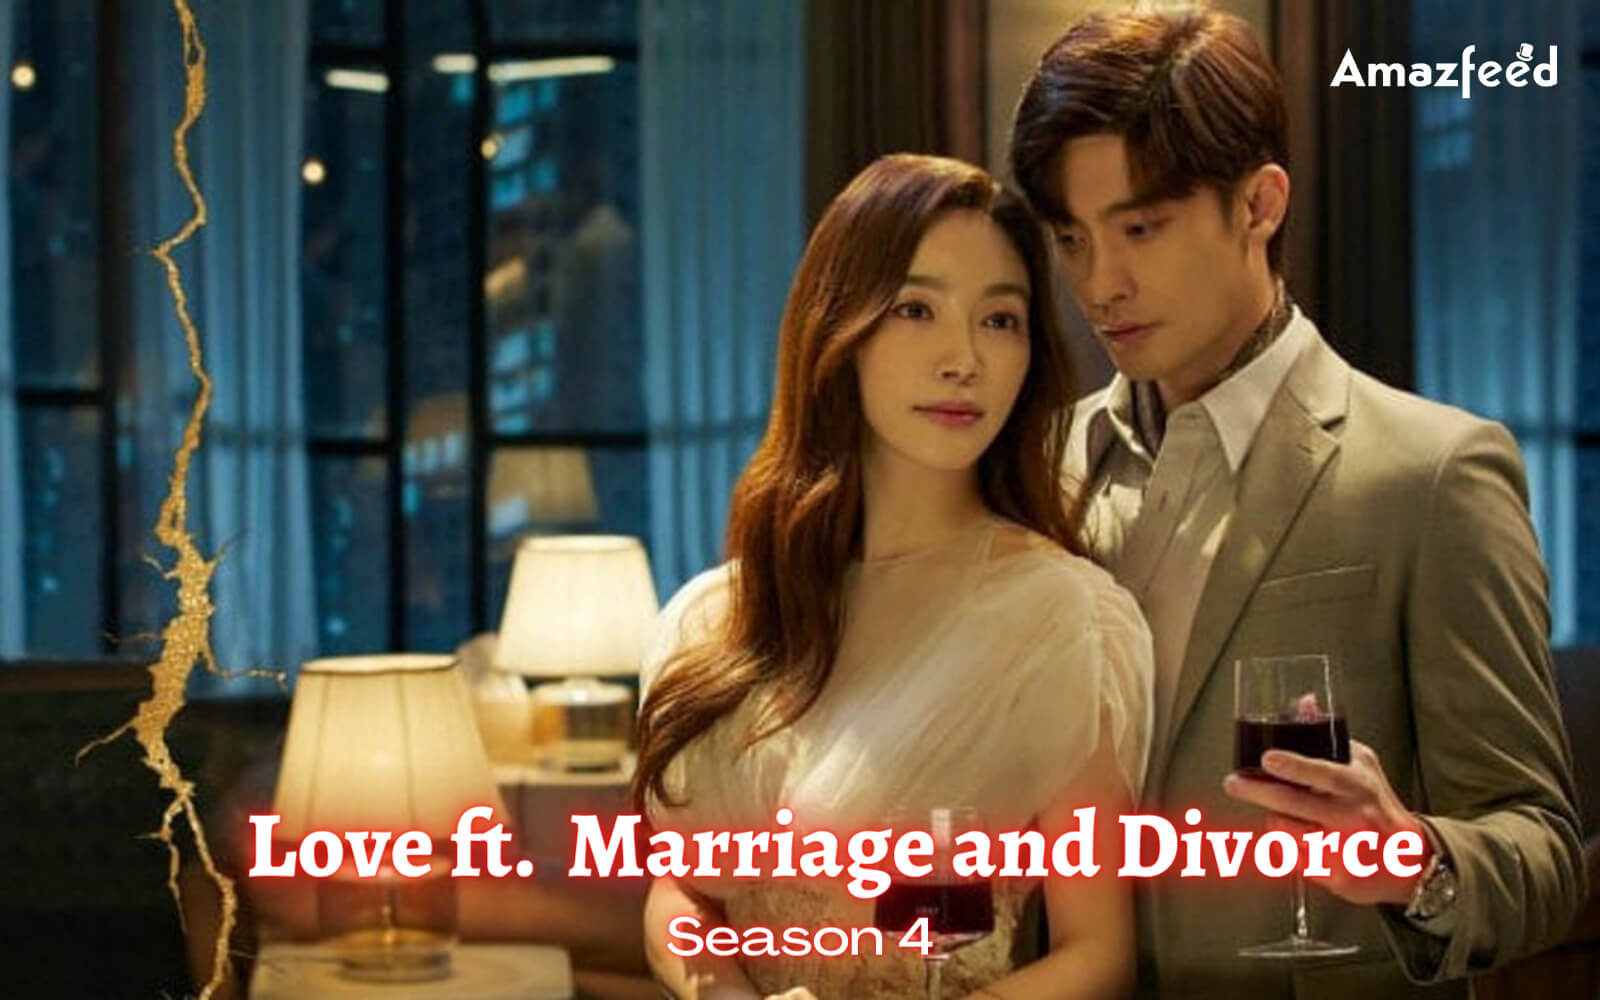 Love (ft. Marriage and Divorce) Season 4 Release date